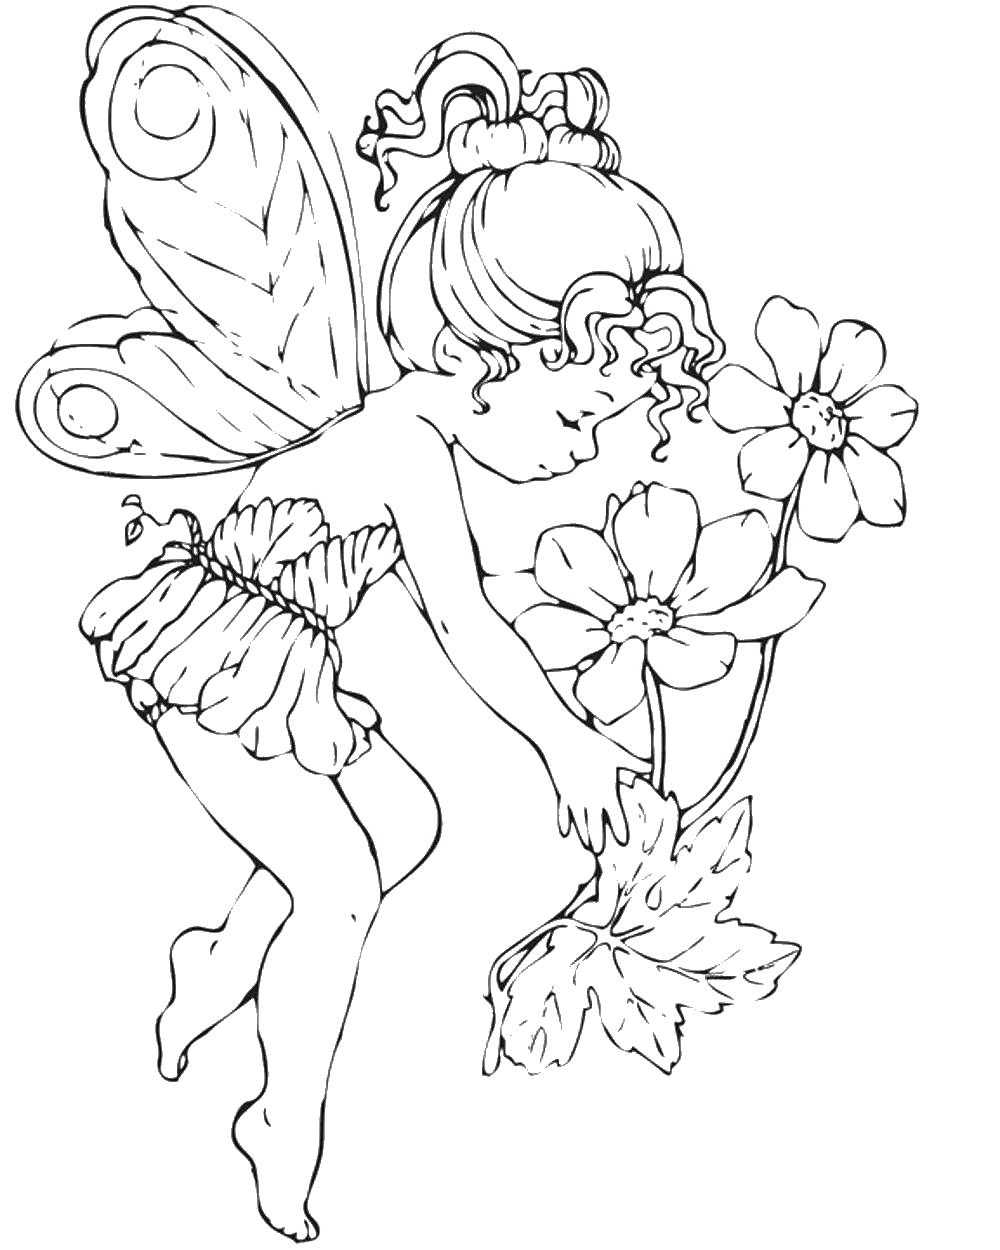 Coloring Fairy with flowers. Category Fairy tales. Tags:  fairy.